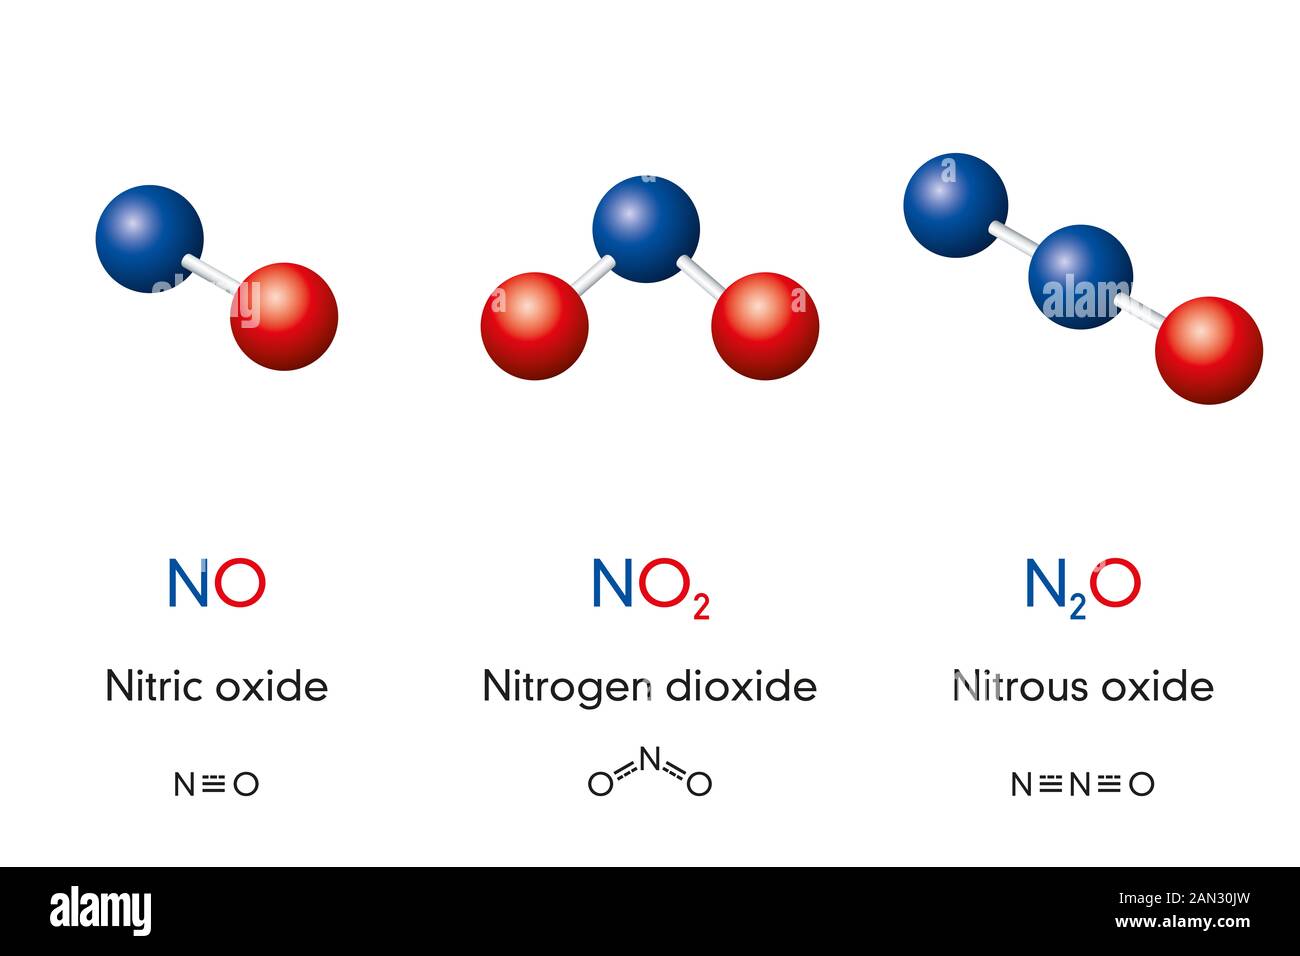 Nitric oxide NO, Nitrogen dioxide NO2 and Nitrous oxide N2O, laughing gas, molecule models and chemical formulas. Ball-and-stick models. Stock Photo